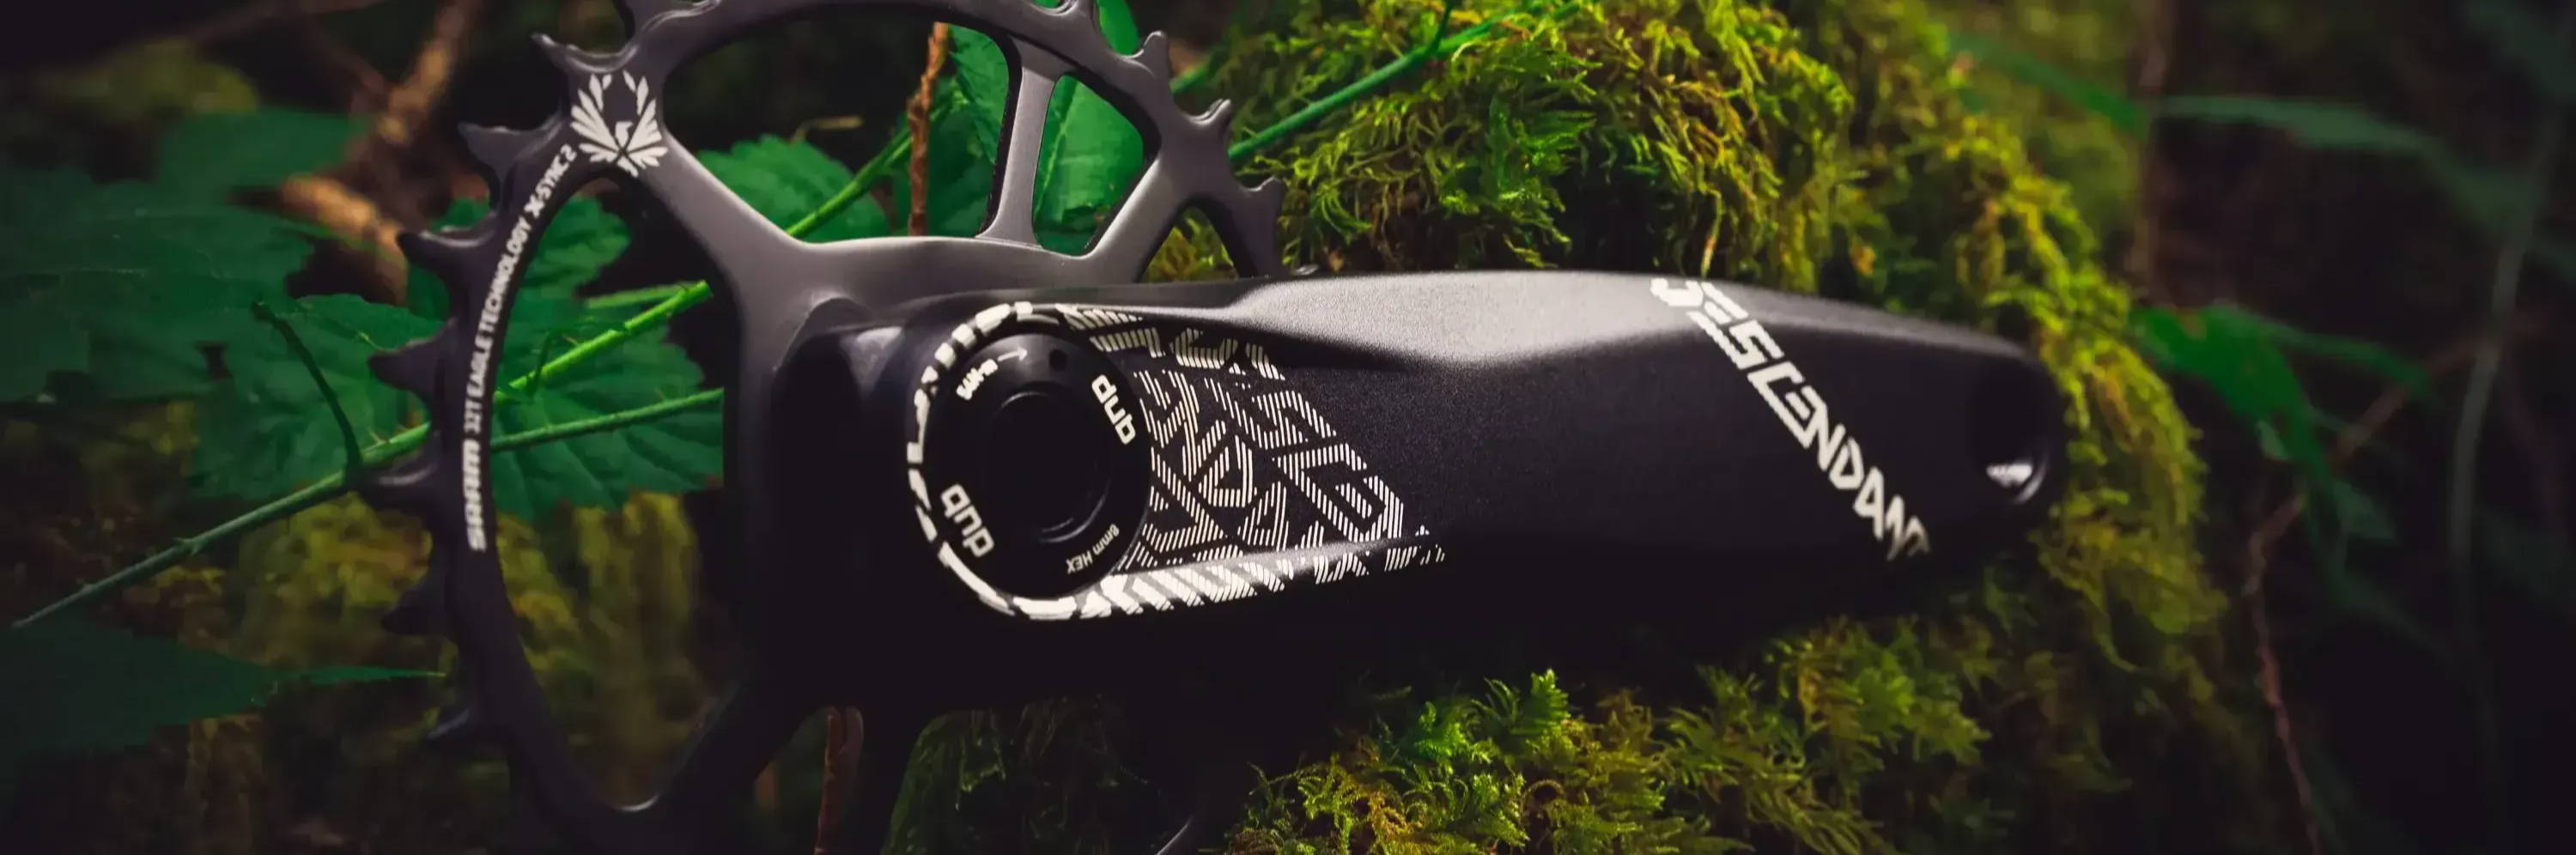 raceface descendant crankset with a sram x-sync chain ring sitting on a mossy log